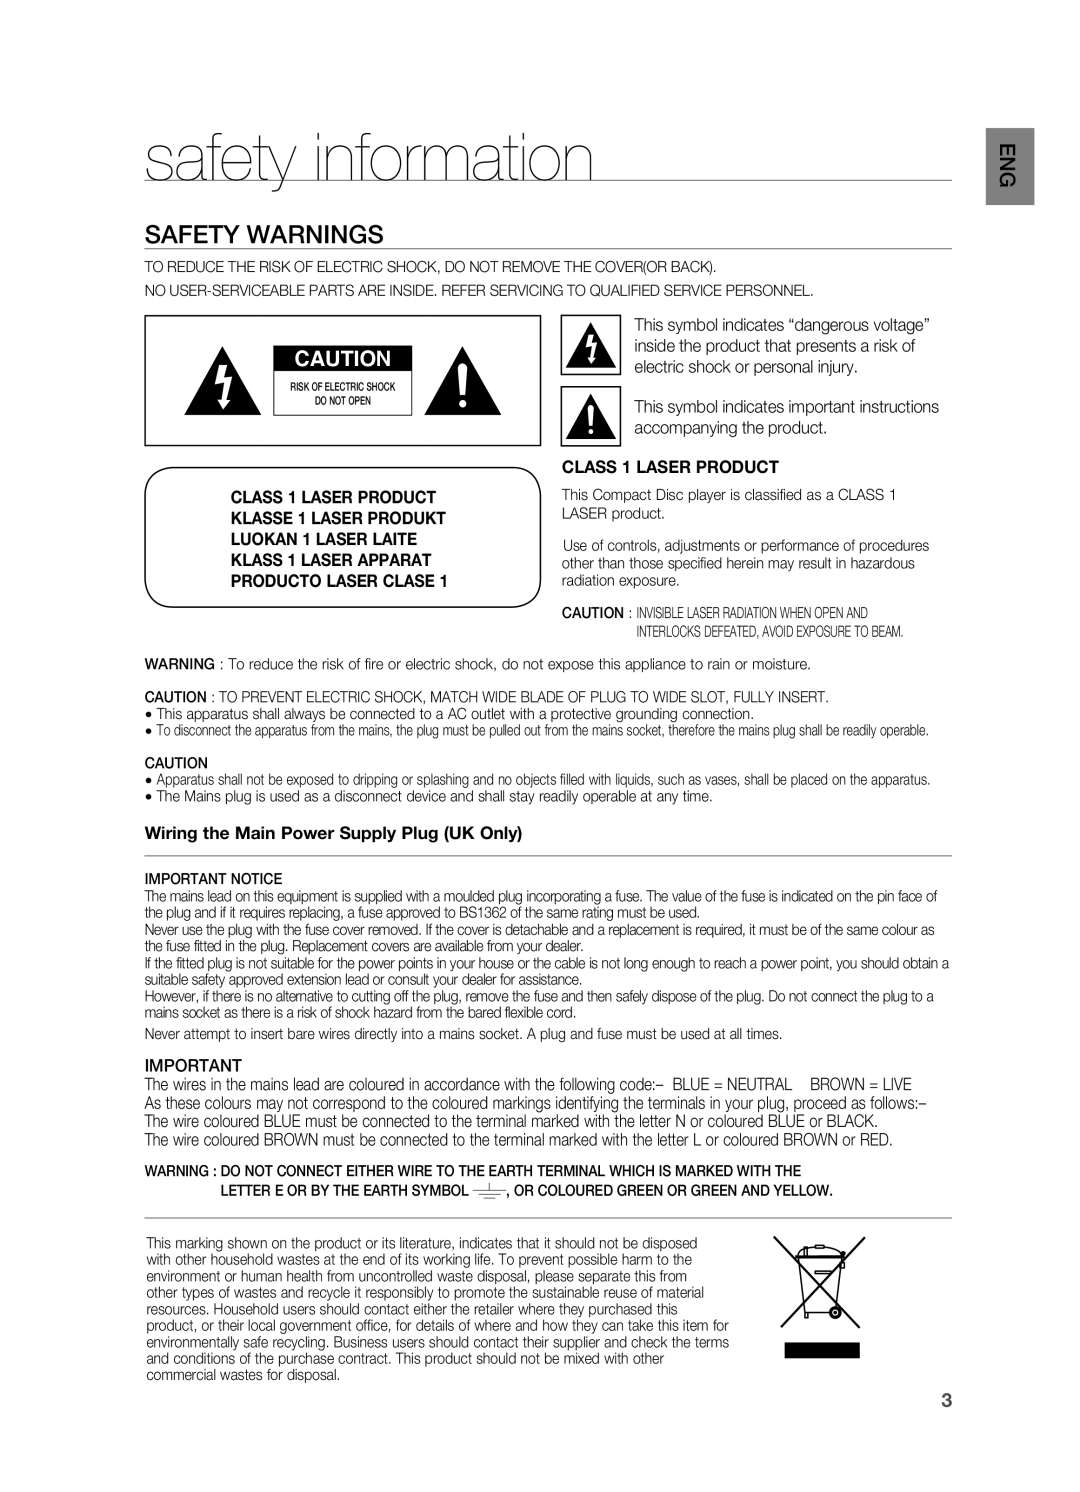 Samsung HT-TX715 safety information, Safety Warnings, CLASS 1 LASER PRODUCT, Wiring the Main Power Supply Plug UK Only 